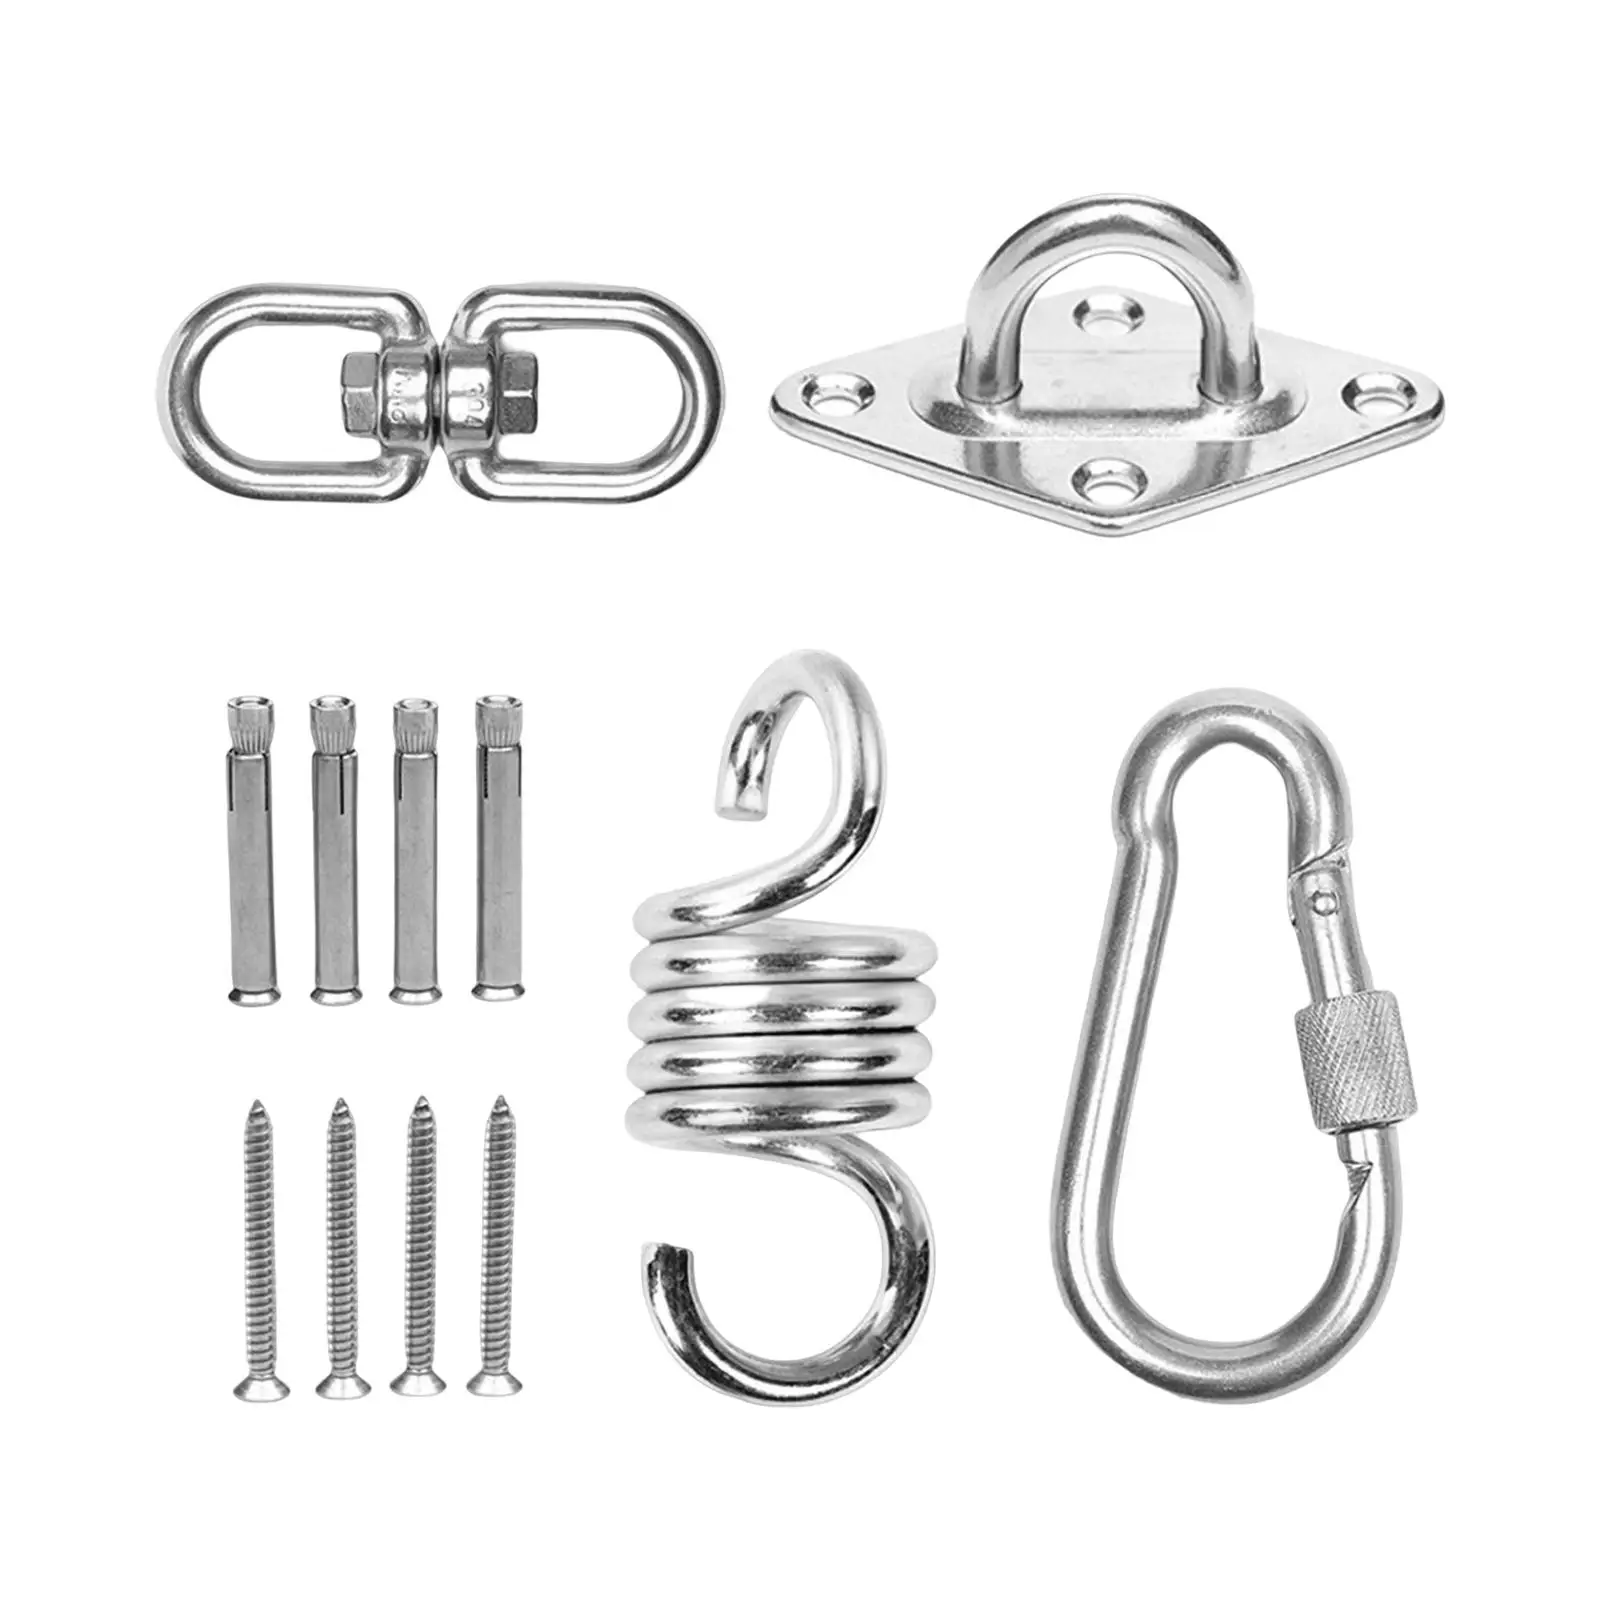 Hammock Chair Hanging Kit Hardware Hook with Screws and Anchors for Training Straps Hammocks